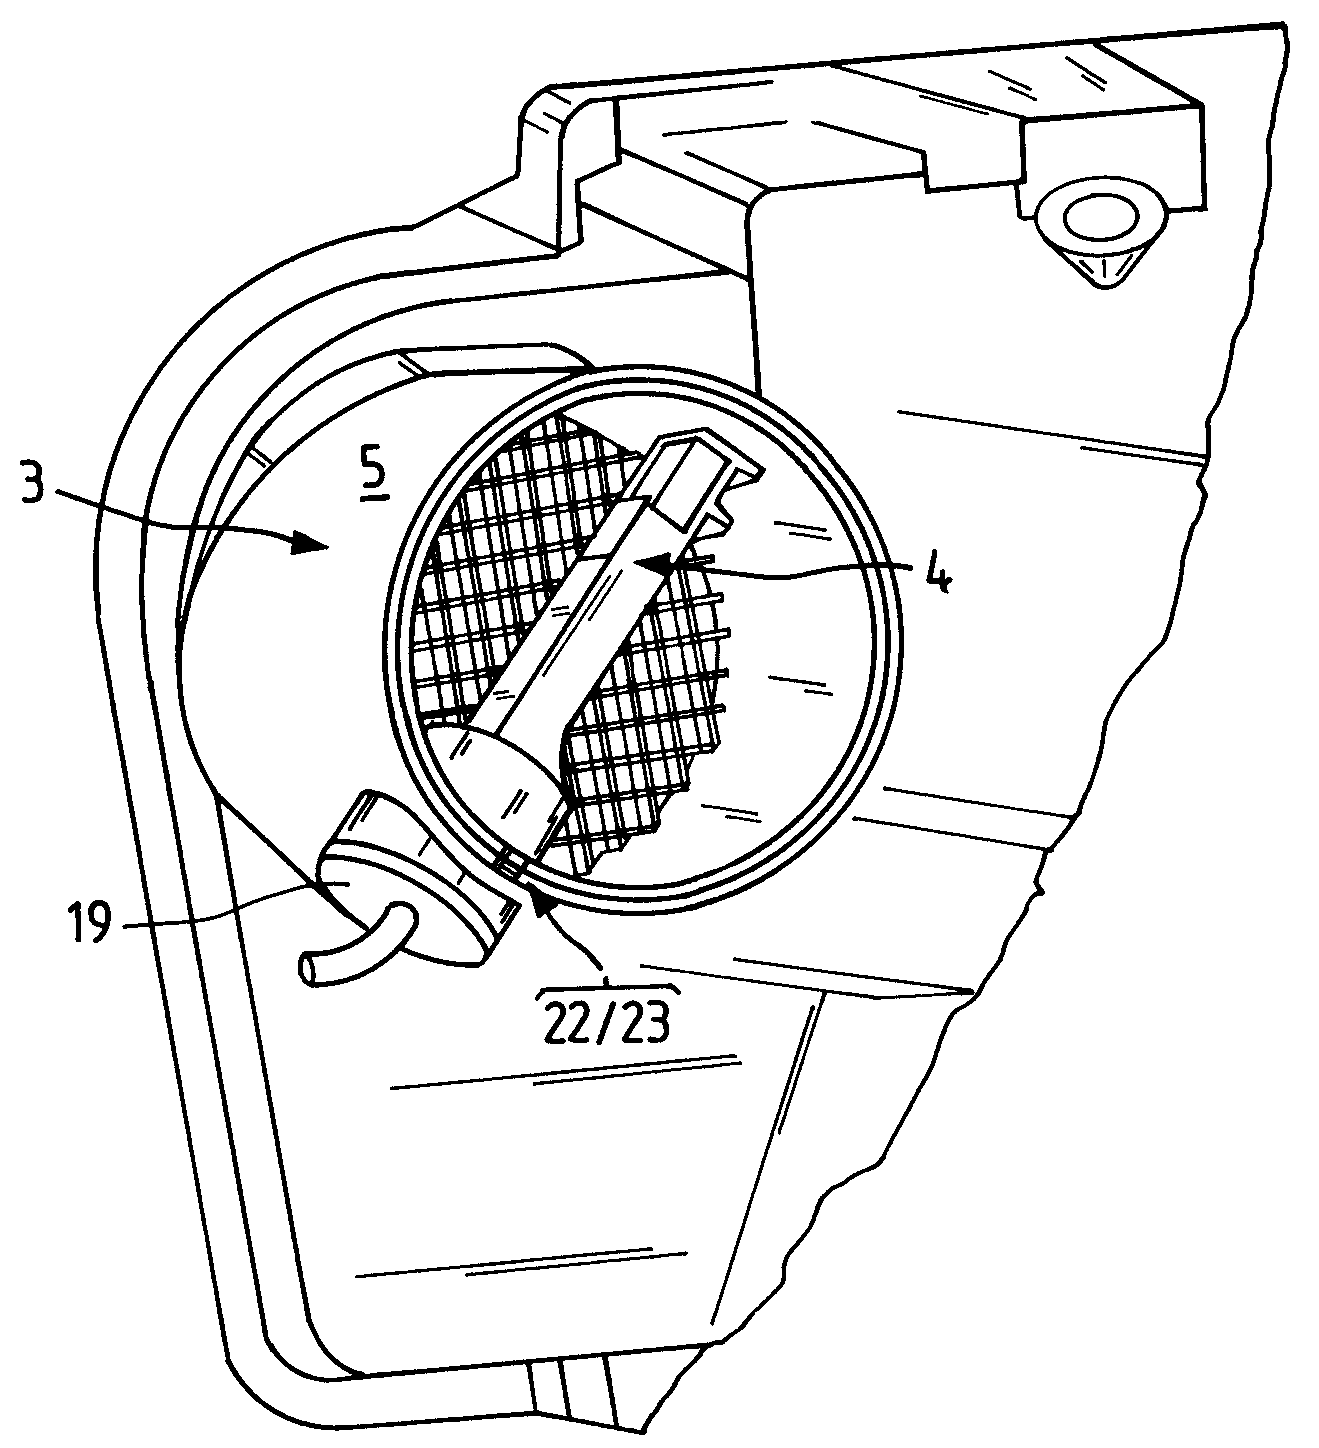 Air Filter System of a Motor Vehicle